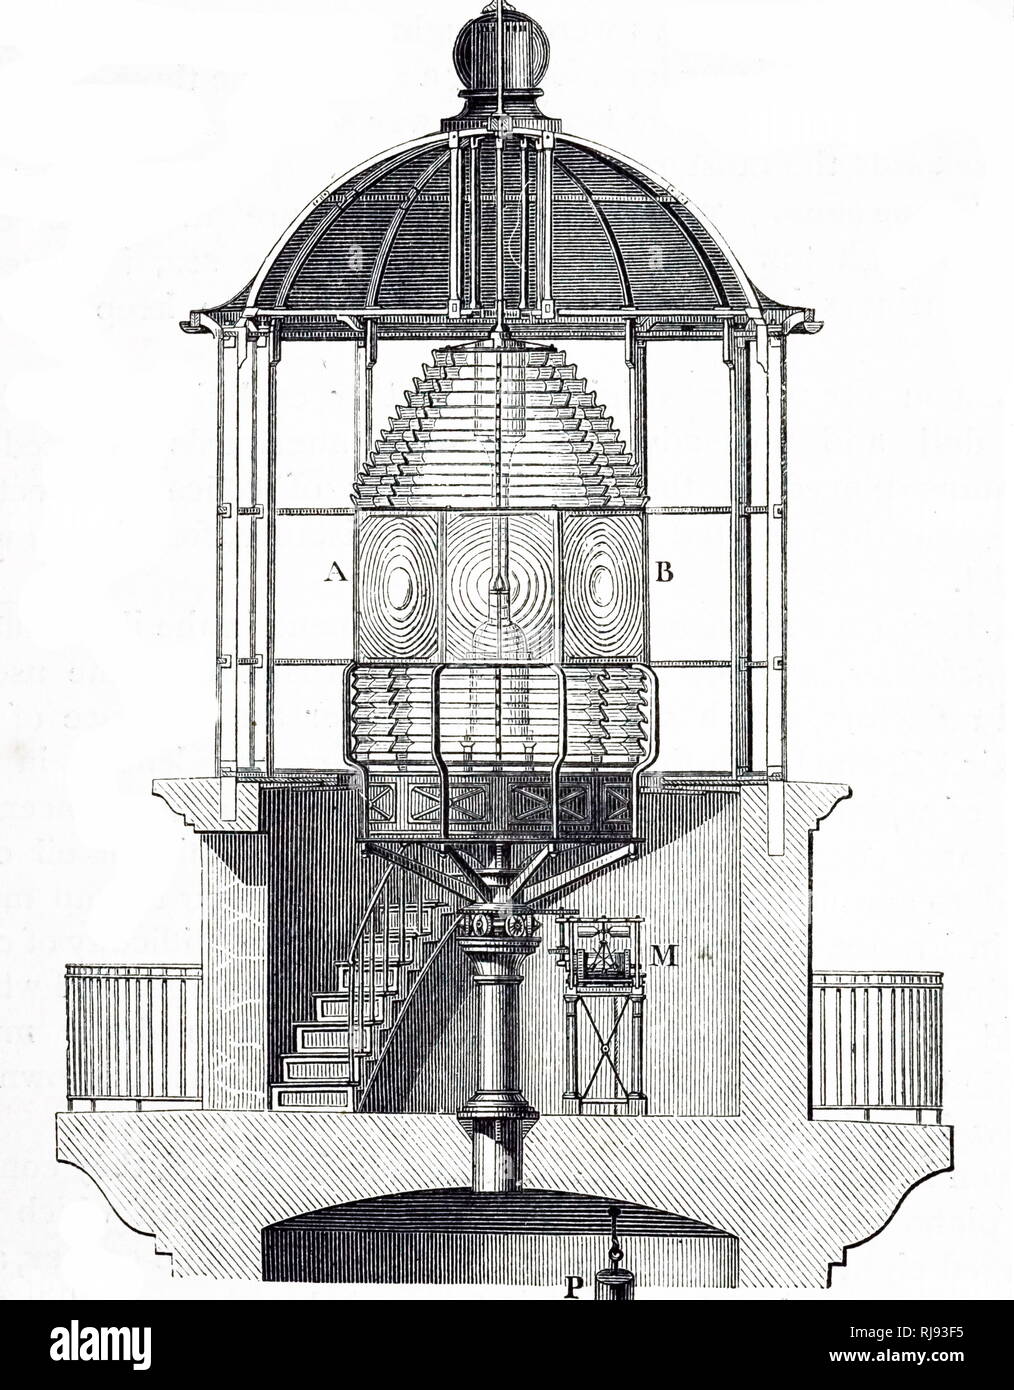 An engraving depicting a lighthouse optics, showing the light source surrounded by eight Fresnel echelon or lighthouse lenses. P is the weight which drives the mechanism for revolving the lens, M, which includes a governor for regulating the speed. Dated 19th century Stock Photo